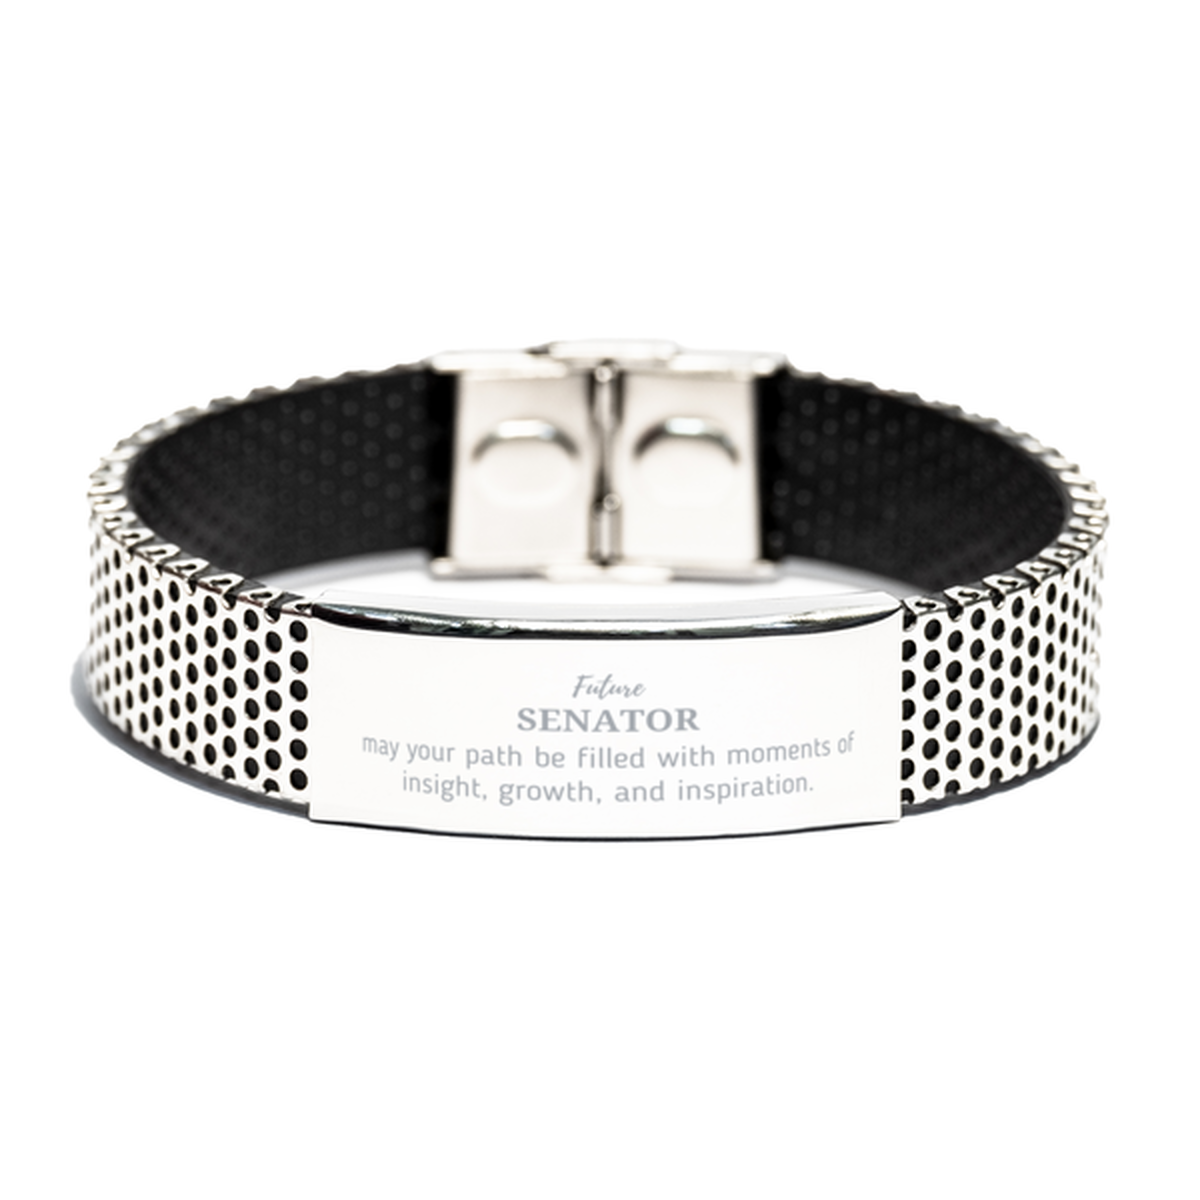 Future Senator Gifts, May your path be filled with moments of insight, Graduation Gifts for New Senator, Christmas Unique Stainless Steel Bracelet For Men, Women, Friends